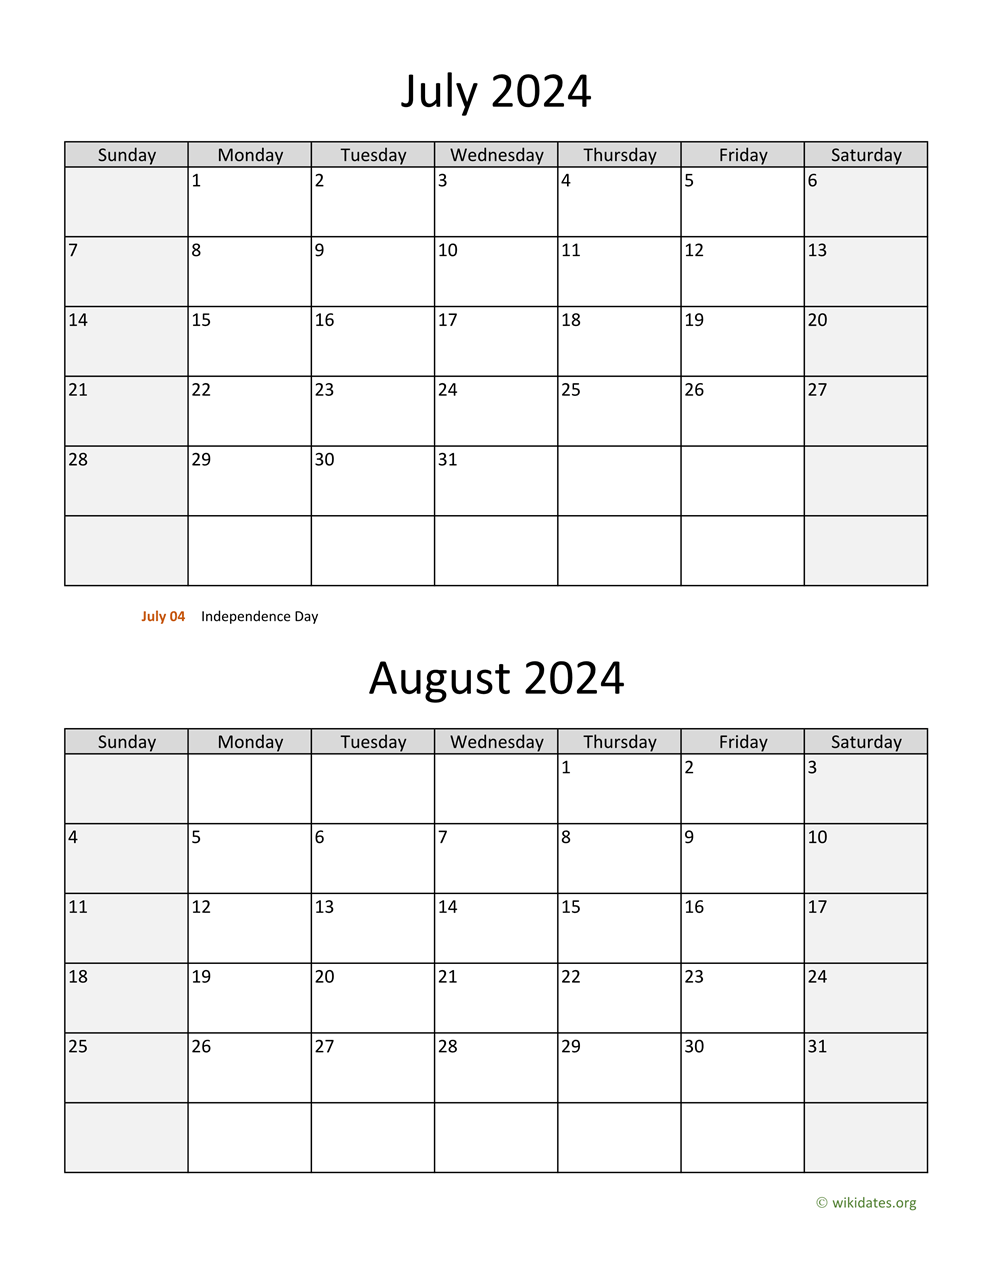 July and August 2024 Calendar  WikiDates.org